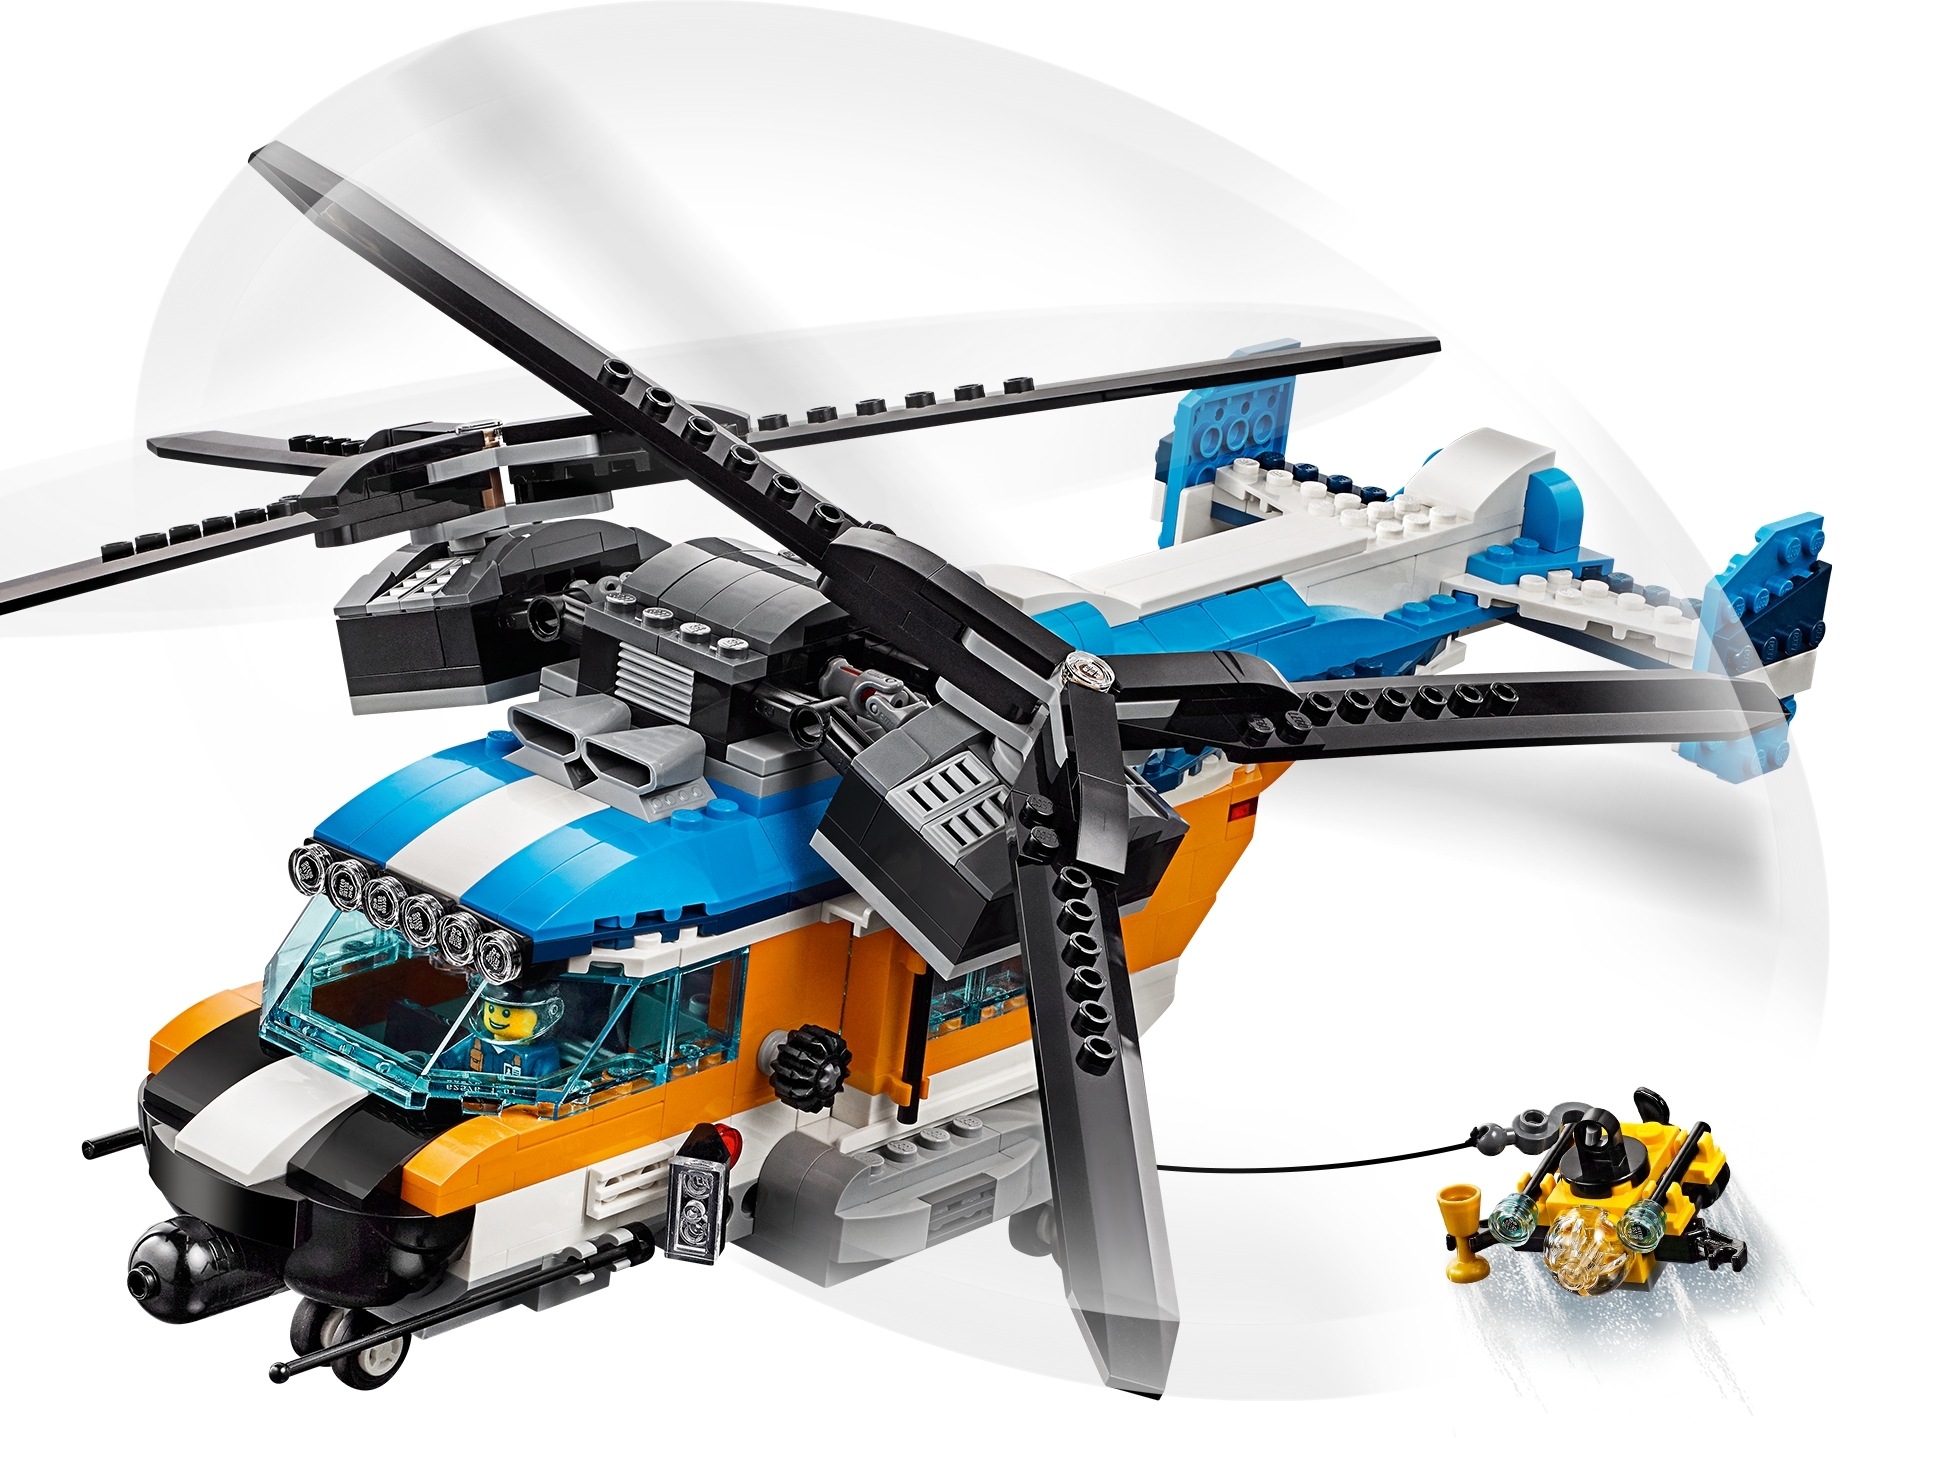 Tail Lego Helicopter Kit: Windscreen Rotor Sled Rails 8636 Yellow/Black Roof 